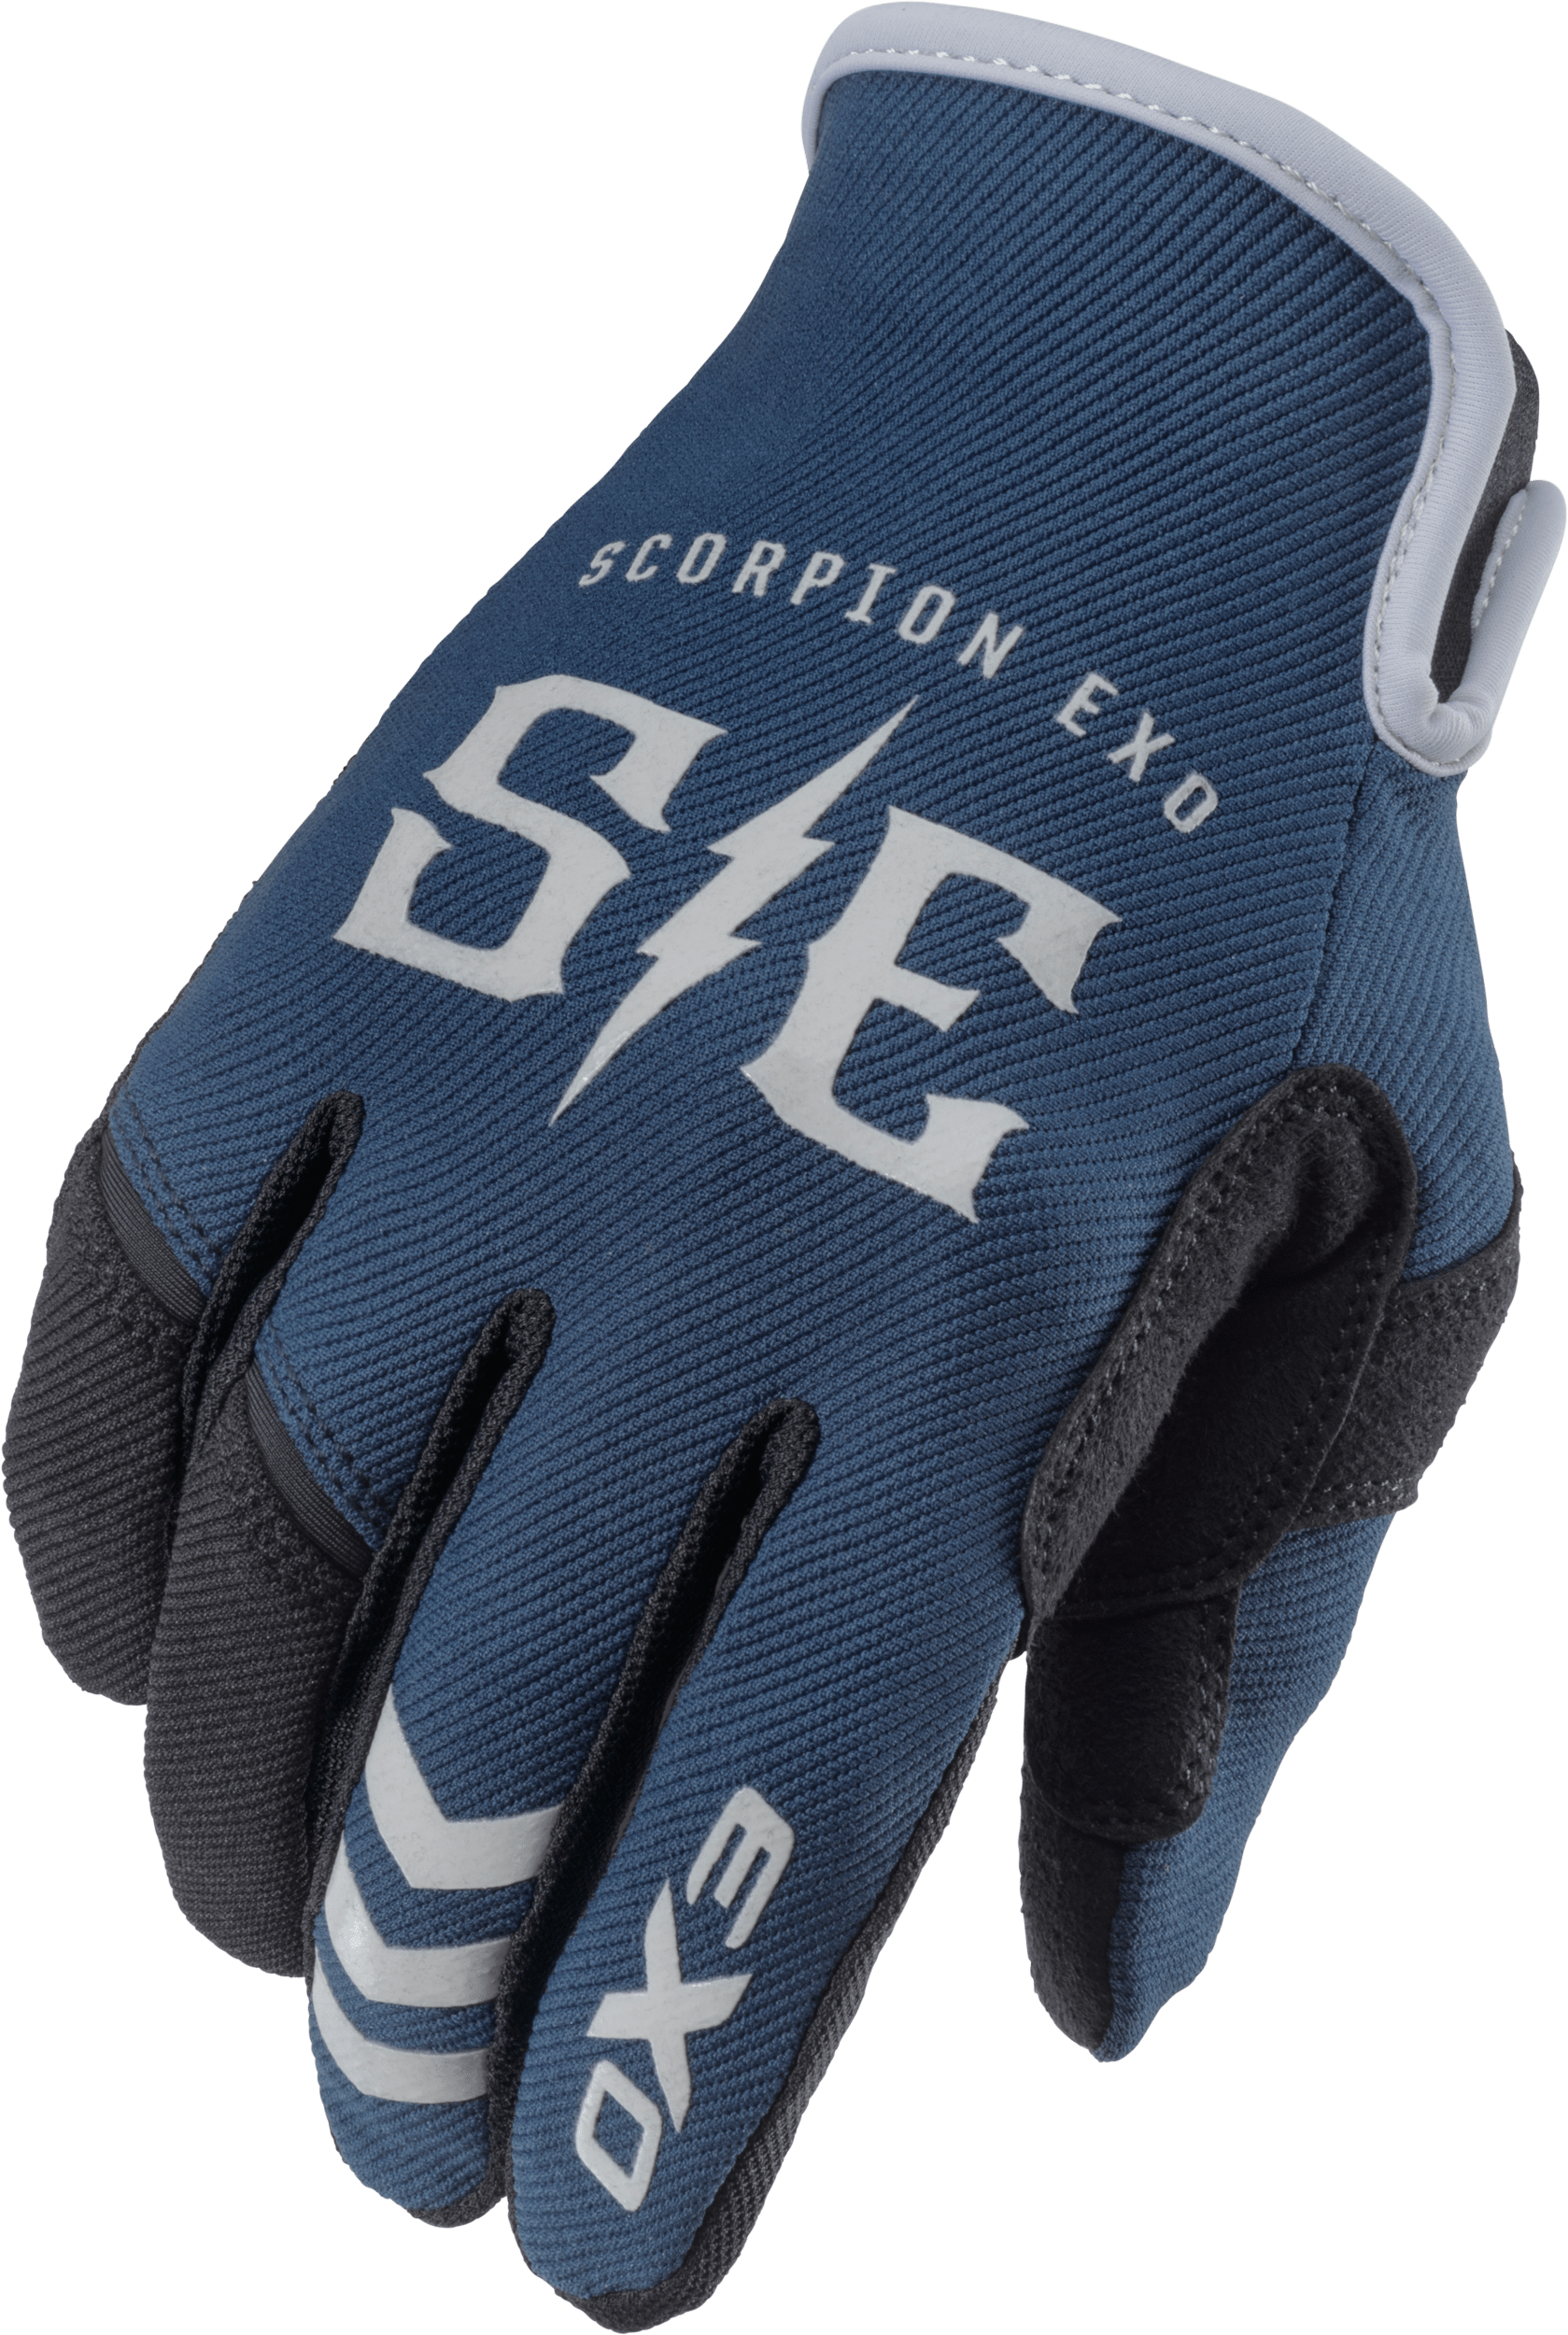 Western Powersports Gloves Blue/Grey / 2X-Large Air-Stretch Charge Gloves by Scorpion Exo G44-077